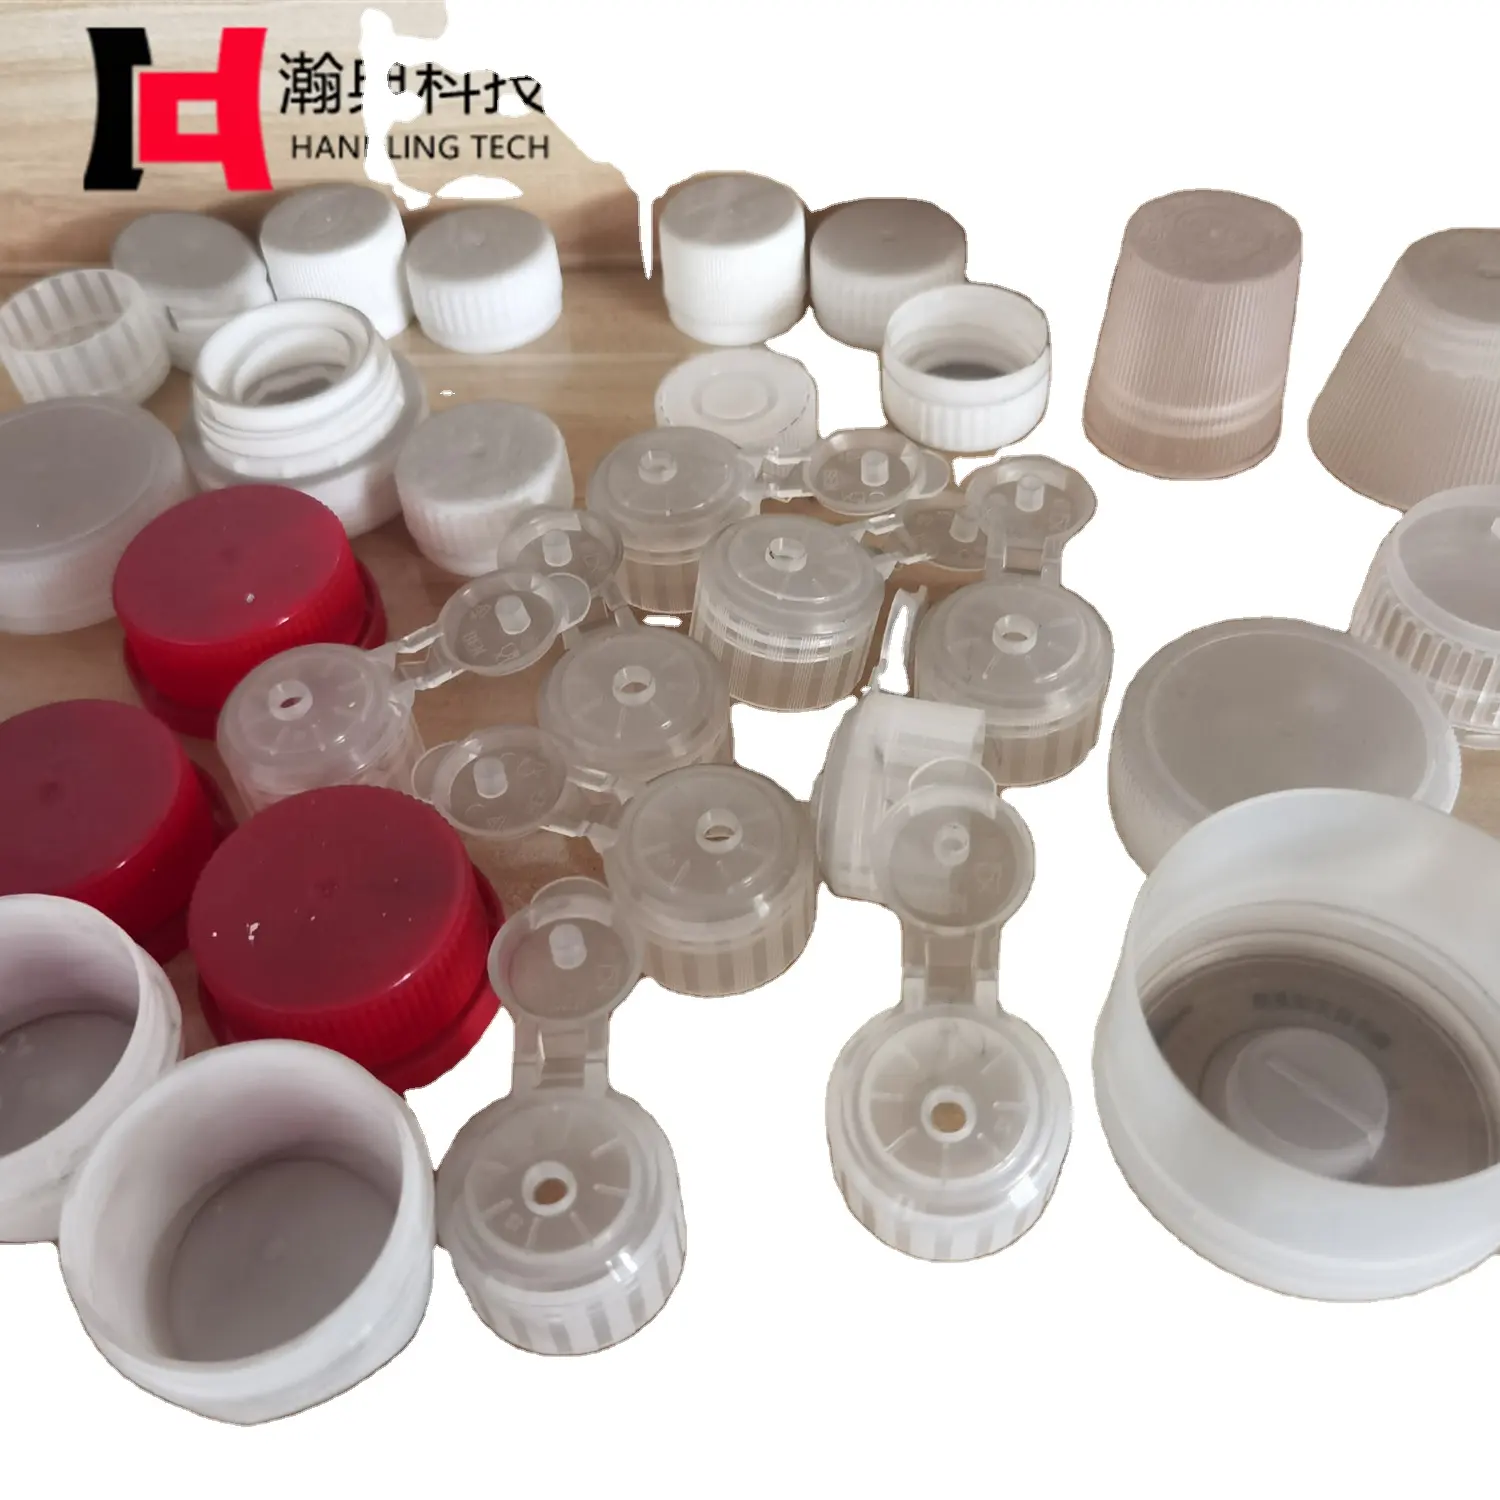 High precision injection mold cap mold China manufacture hot